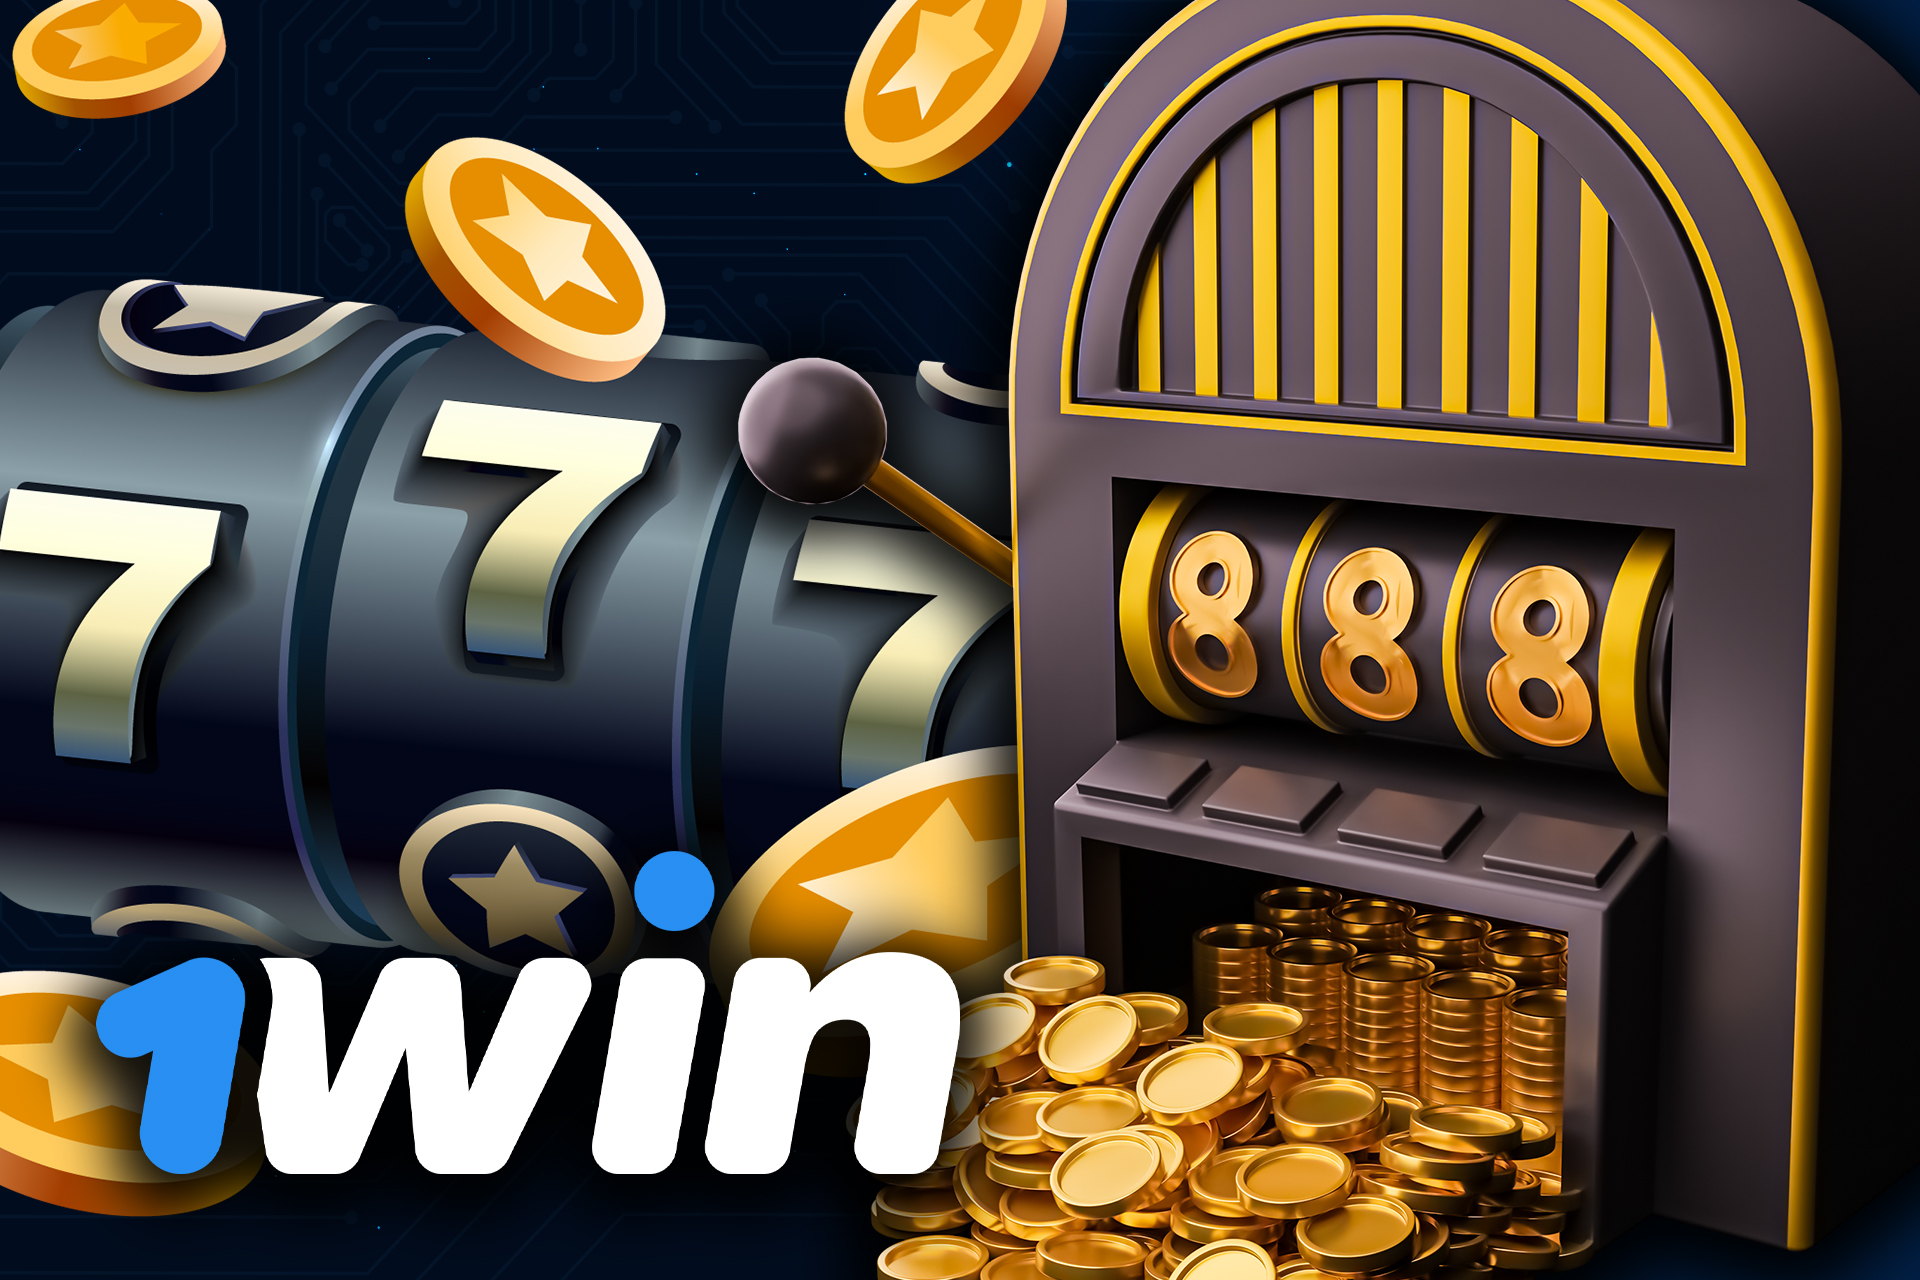 You can find many different Drop and Wins games in the 1win casino.